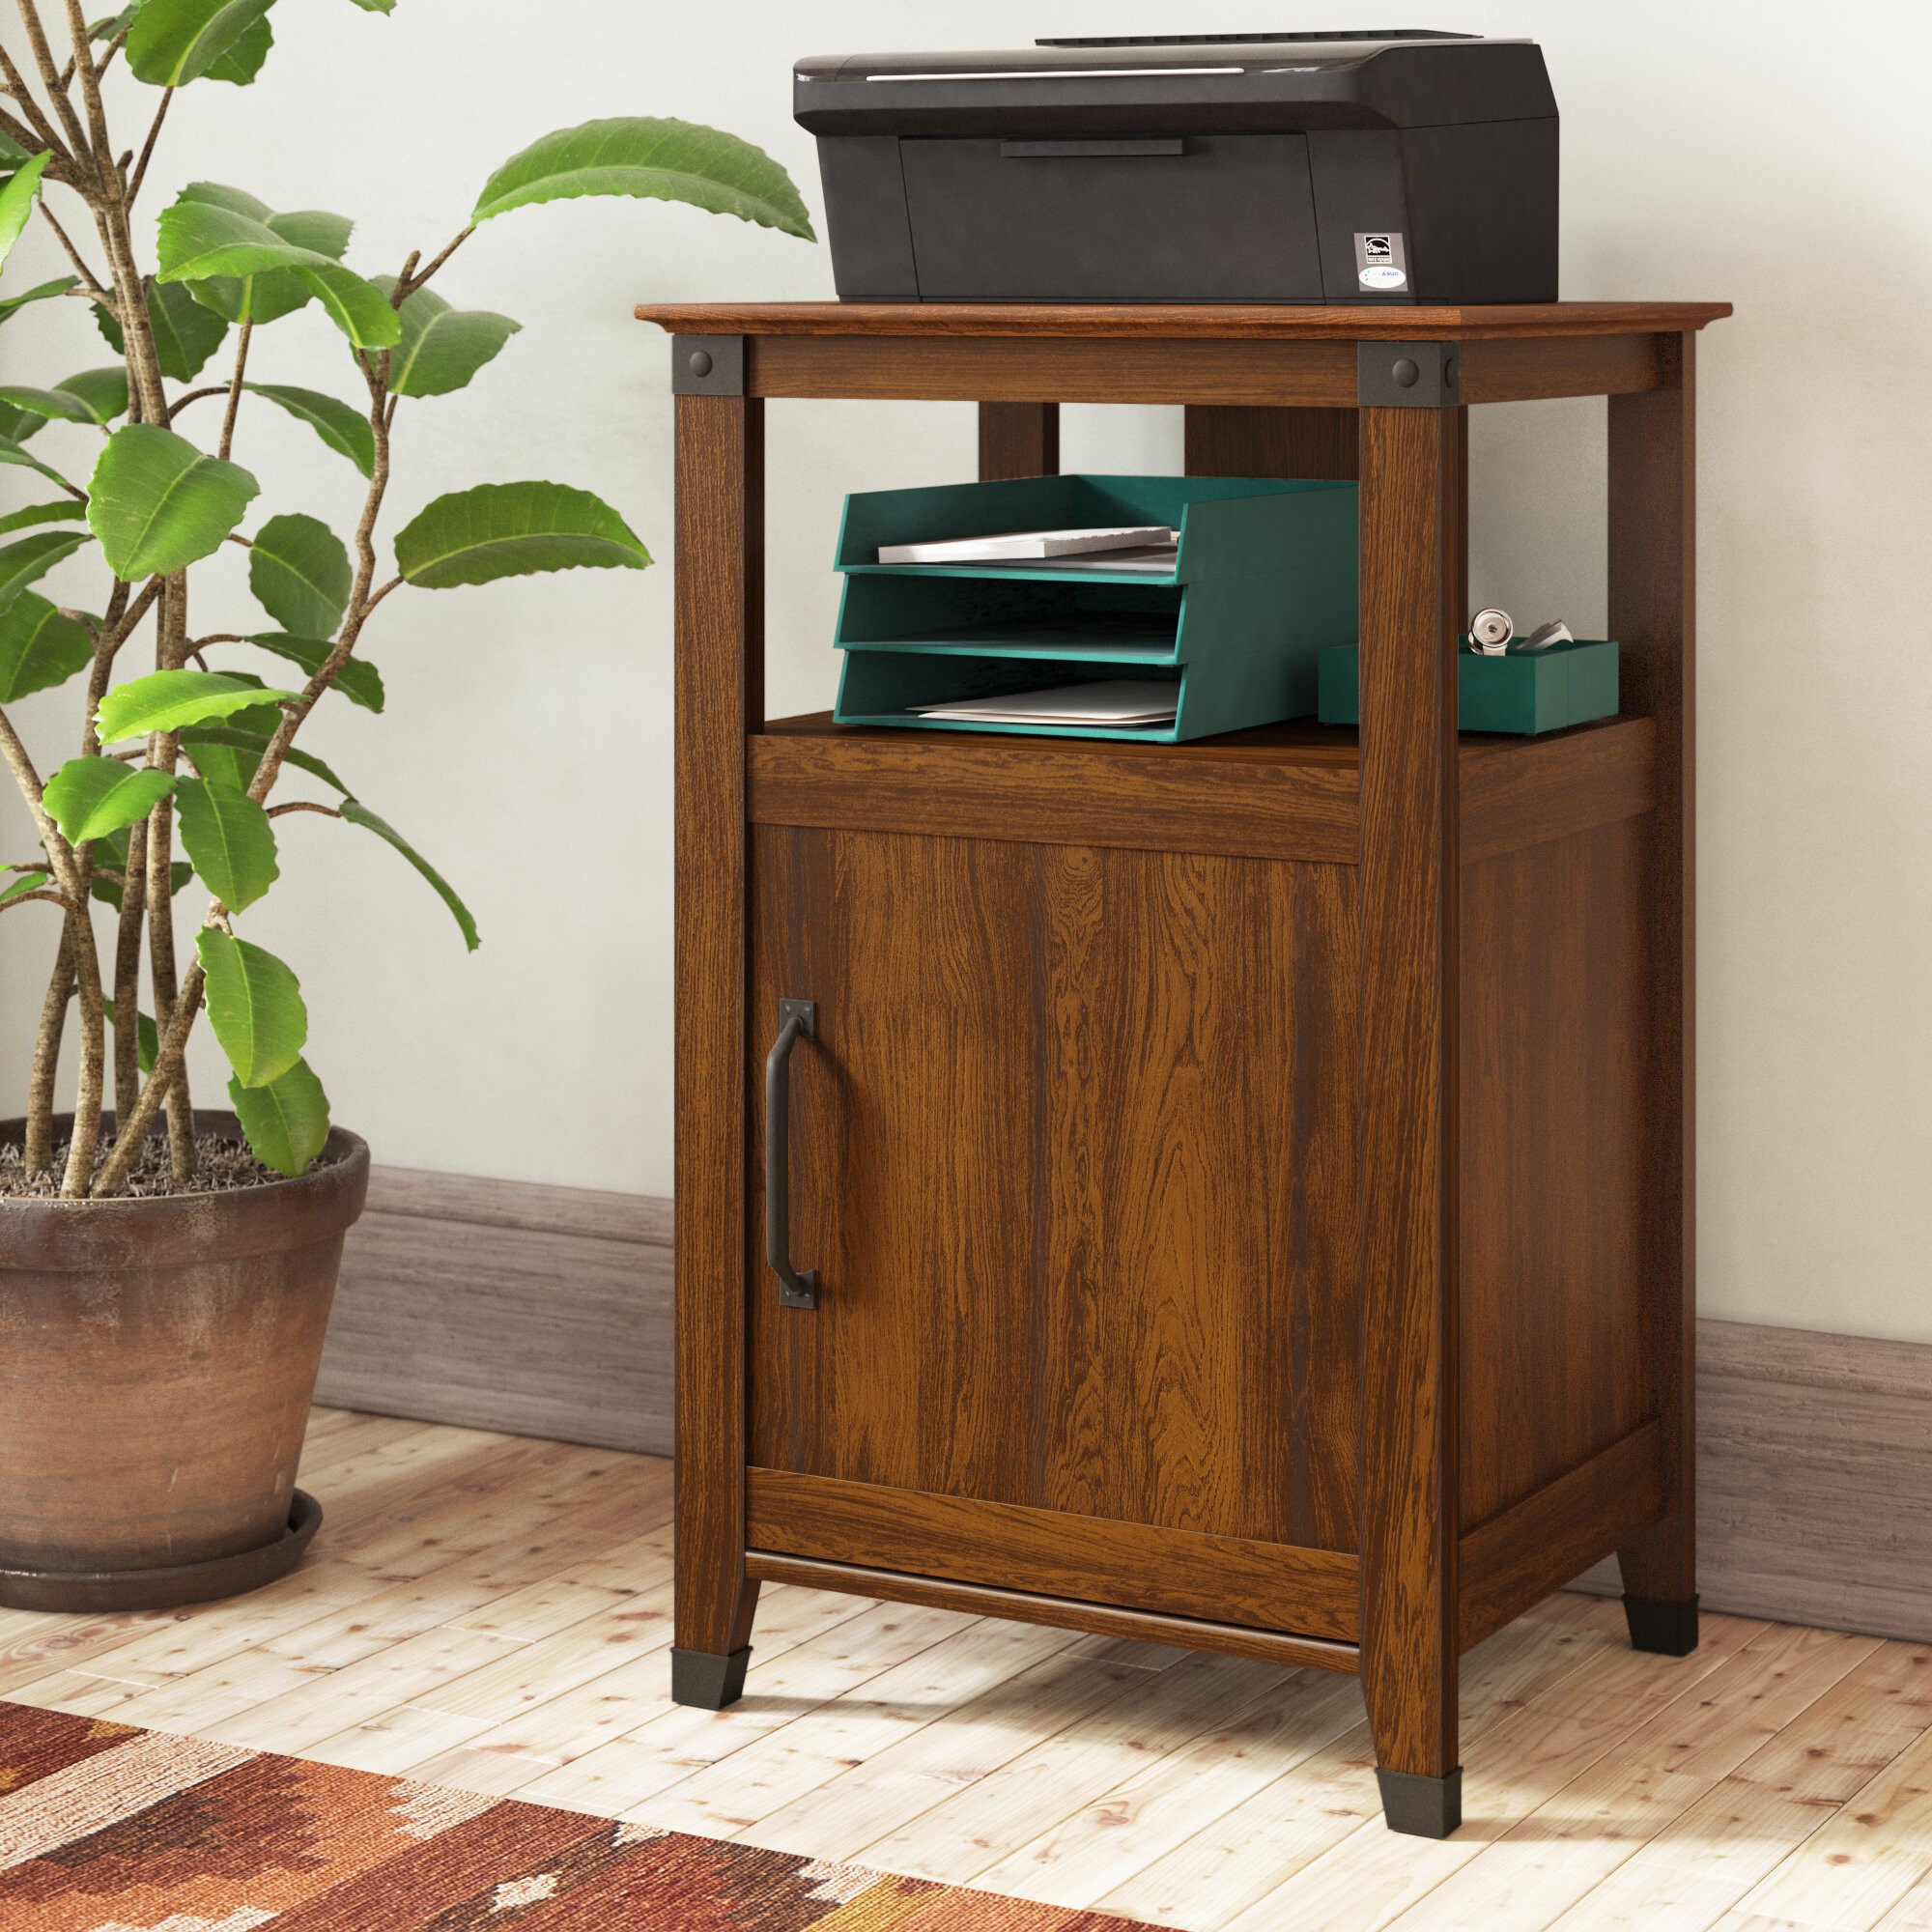 Chappel Printer Stand With Storage